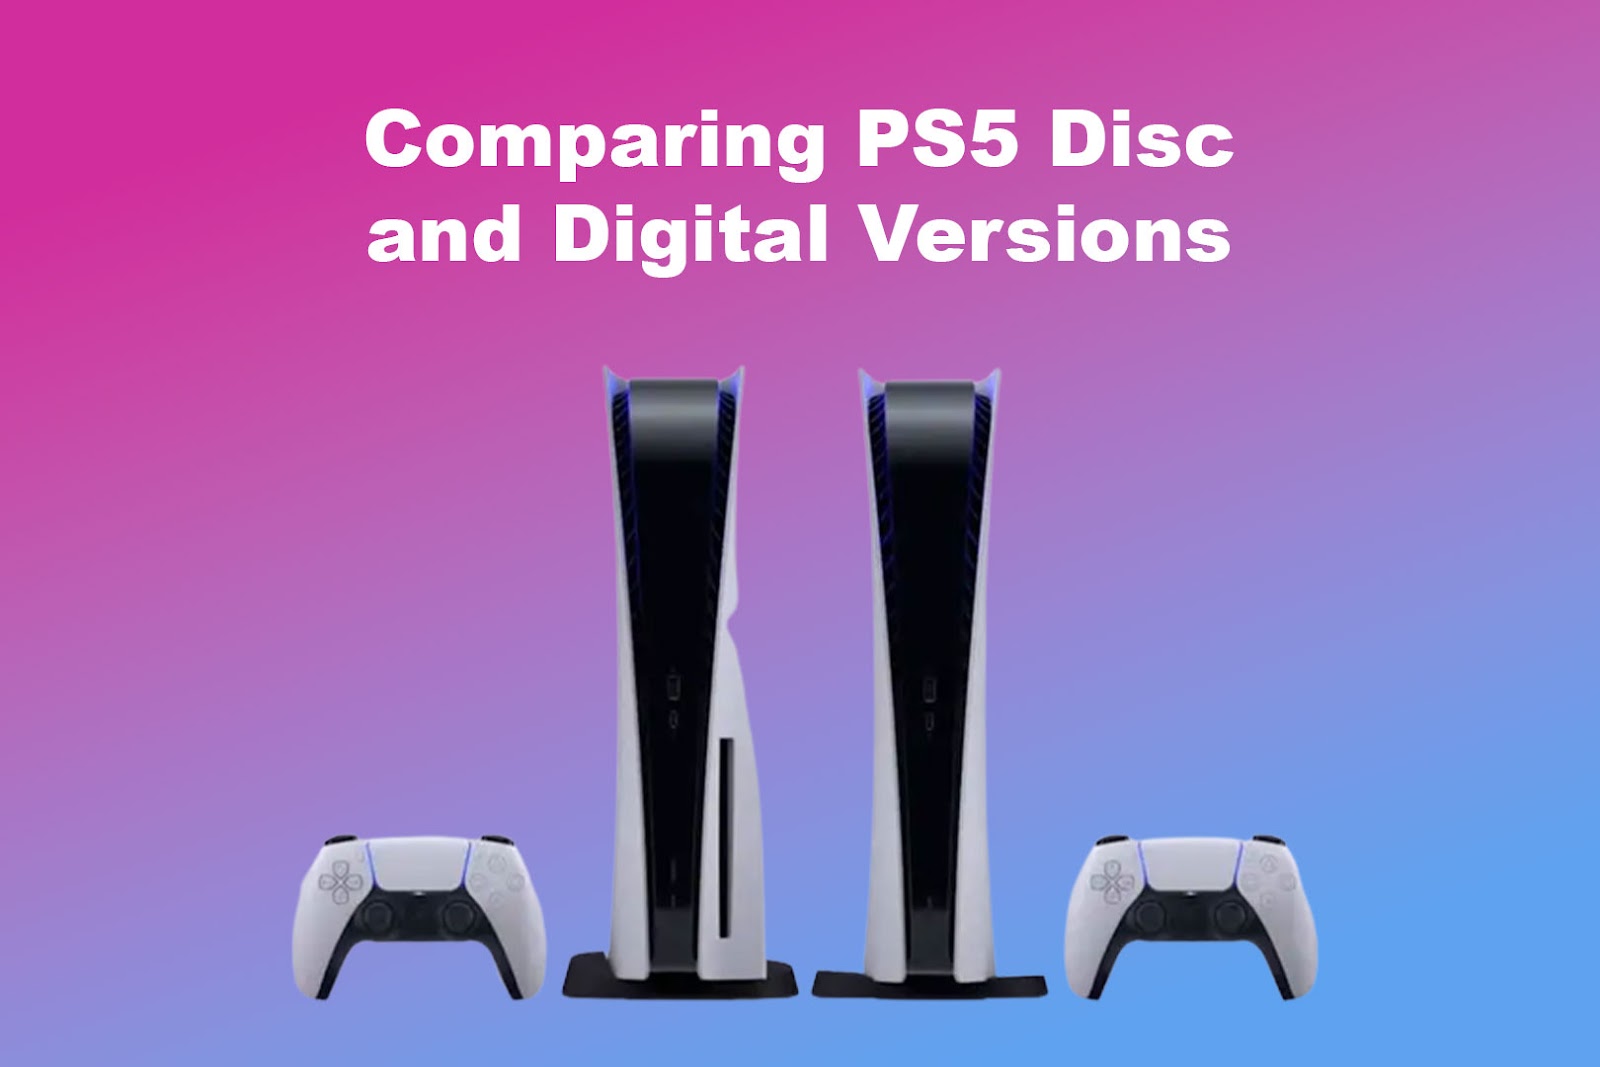 Comparing PS5 Disc and Digital Versions